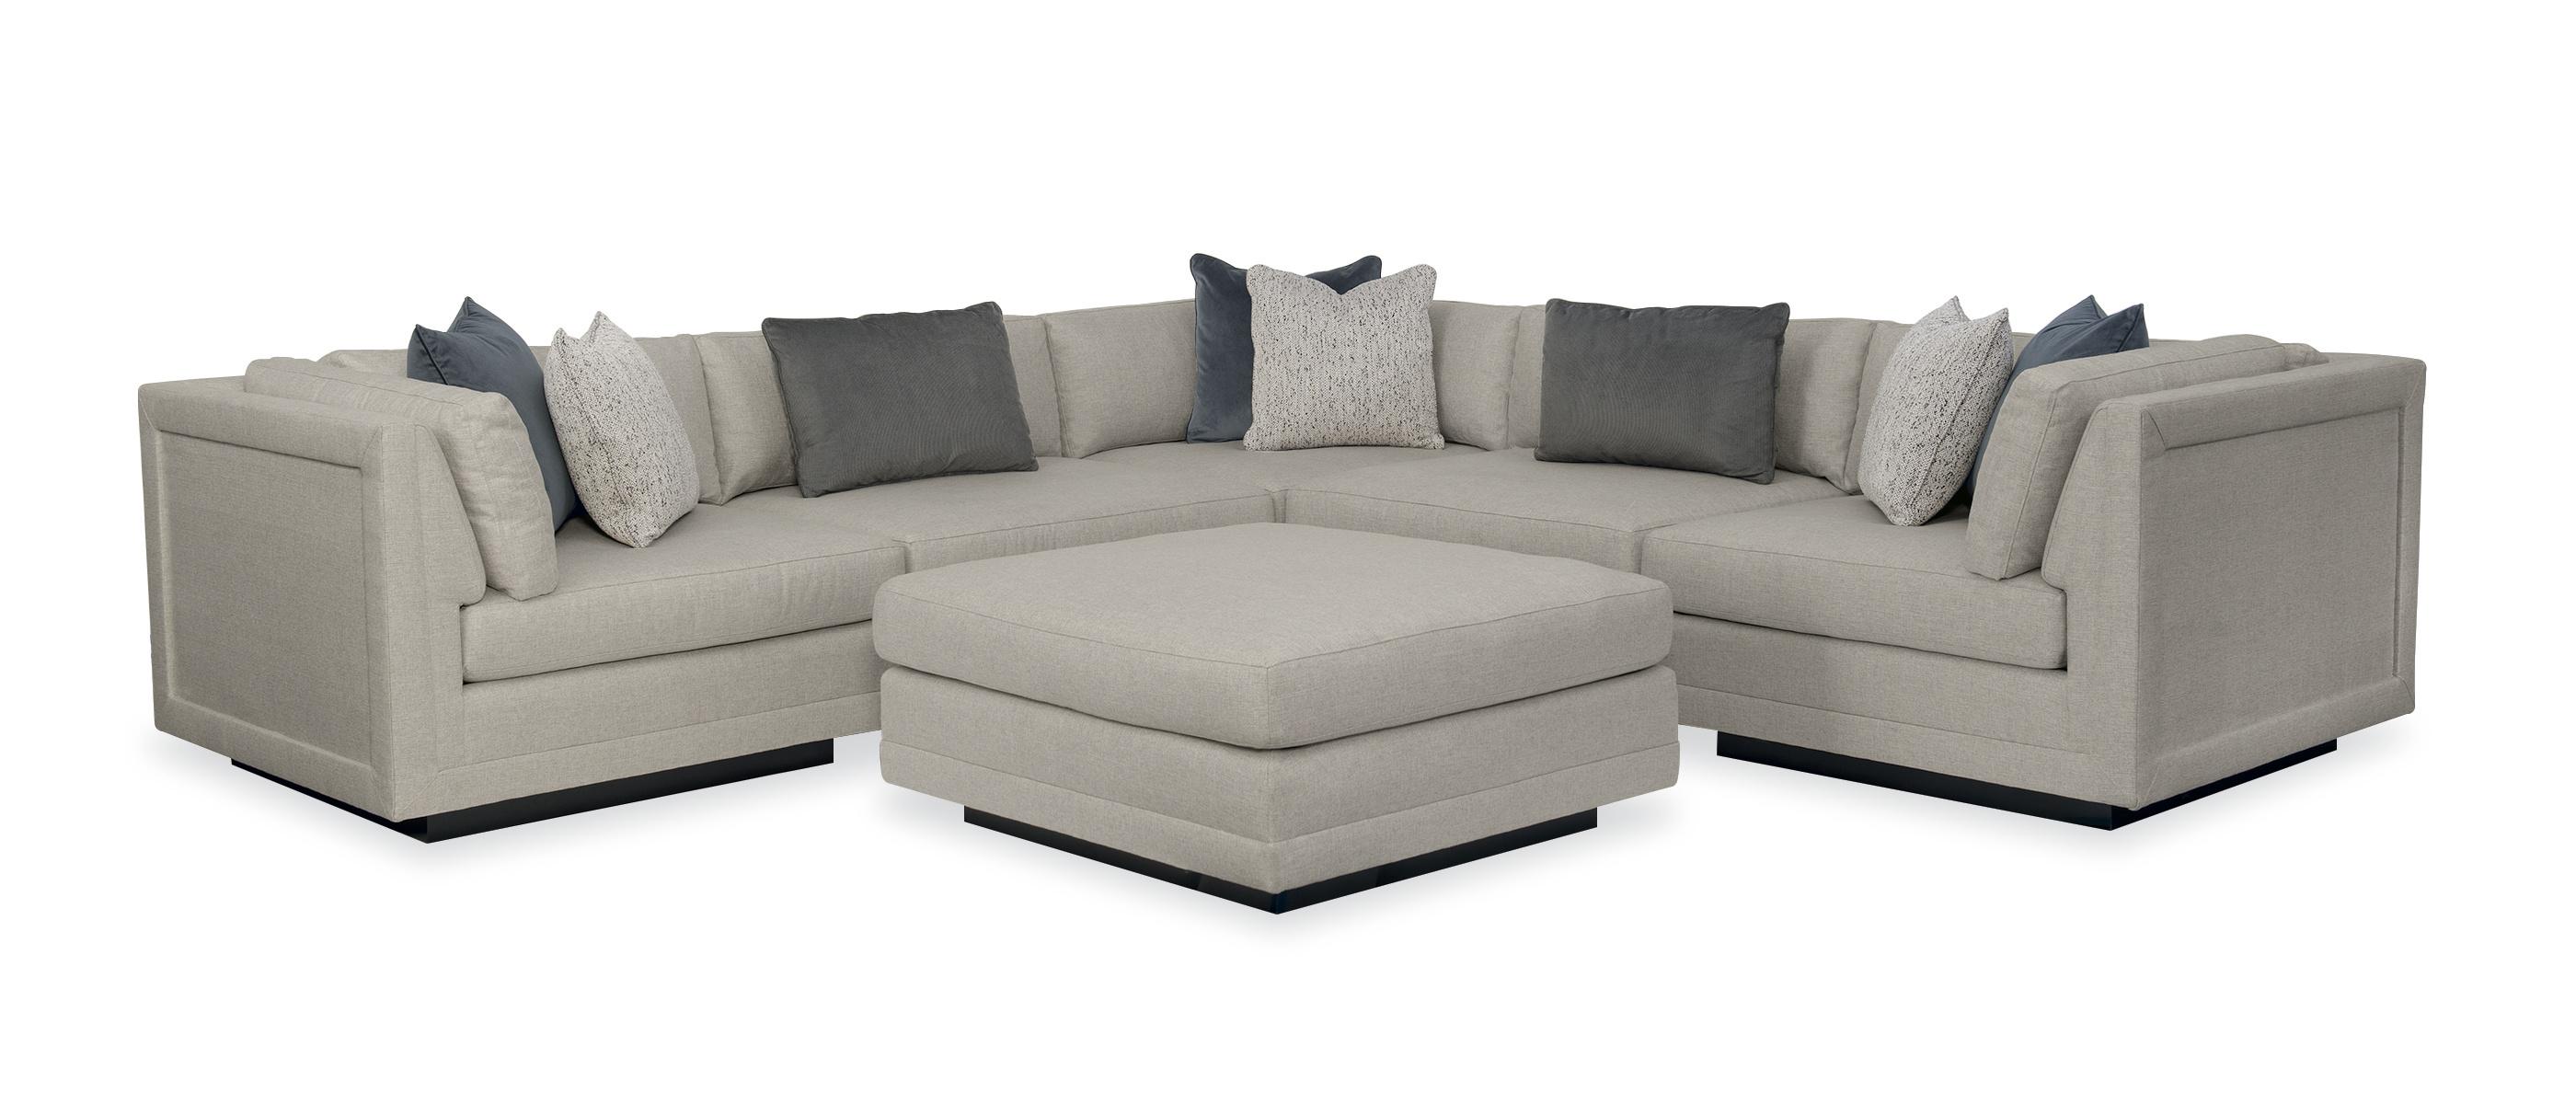 Caracole Fusion 6 Piece Sectional Sectional Sofa